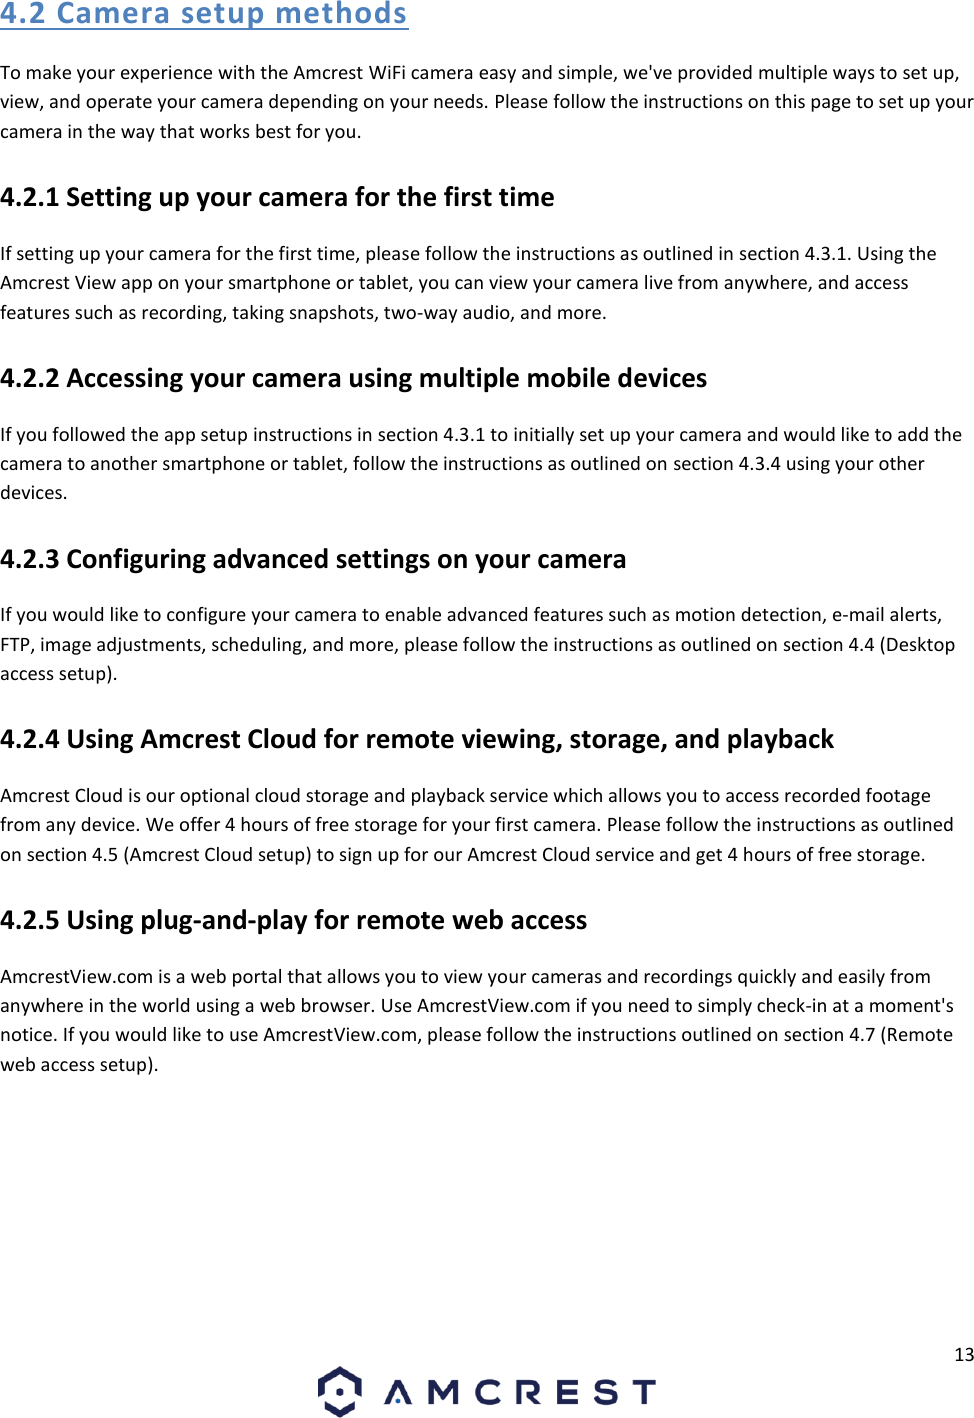 13  4.2 Camera setup methods To make your experience with the Amcrest WiFi camera easy and simple, we&apos;ve provided multiple ways to set up, view, and operate your camera depending on your needs. Please follow the instructions on this page to set up your camera in the way that works best for you. 4.2.1 Setting up your camera for the first time If setting up your camera for the first time, please follow the instructions as outlined in section 4.3.1. Using the Amcrest View app on your smartphone or tablet, you can view your camera live from anywhere, and access features such as recording, taking snapshots, two-way audio, and more. 4.2.2 Accessing your camera using multiple mobile devices If you followed the app setup instructions in section 4.3.1 to initially set up your camera and would like to add the camera to another smartphone or tablet, follow the instructions as outlined on section 4.3.4 using your other devices. 4.2.3 Configuring advanced settings on your camera If you would like to configure your camera to enable advanced features such as motion detection, e-mail alerts, FTP, image adjustments, scheduling, and more, please follow the instructions as outlined on section 4.4 (Desktop access setup). 4.2.4 Using Amcrest Cloud for remote viewing, storage, and playback Amcrest Cloud is our optional cloud storage and playback service which allows you to access recorded footage from any device. We offer 4 hours of free storage for your first camera. Please follow the instructions as outlined on section 4.5 (Amcrest Cloud setup) to sign up for our Amcrest Cloud service and get 4 hours of free storage. 4.2.5 Using plug-and-play for remote web access AmcrestView.com is a web portal that allows you to view your cameras and recordings quickly and easily from anywhere in the world using a web browser. Use AmcrestView.com if you need to simply check-in at a moment&apos;s notice. If you would like to use AmcrestView.com, please follow the instructions outlined on section 4.7 (Remote web access setup).    